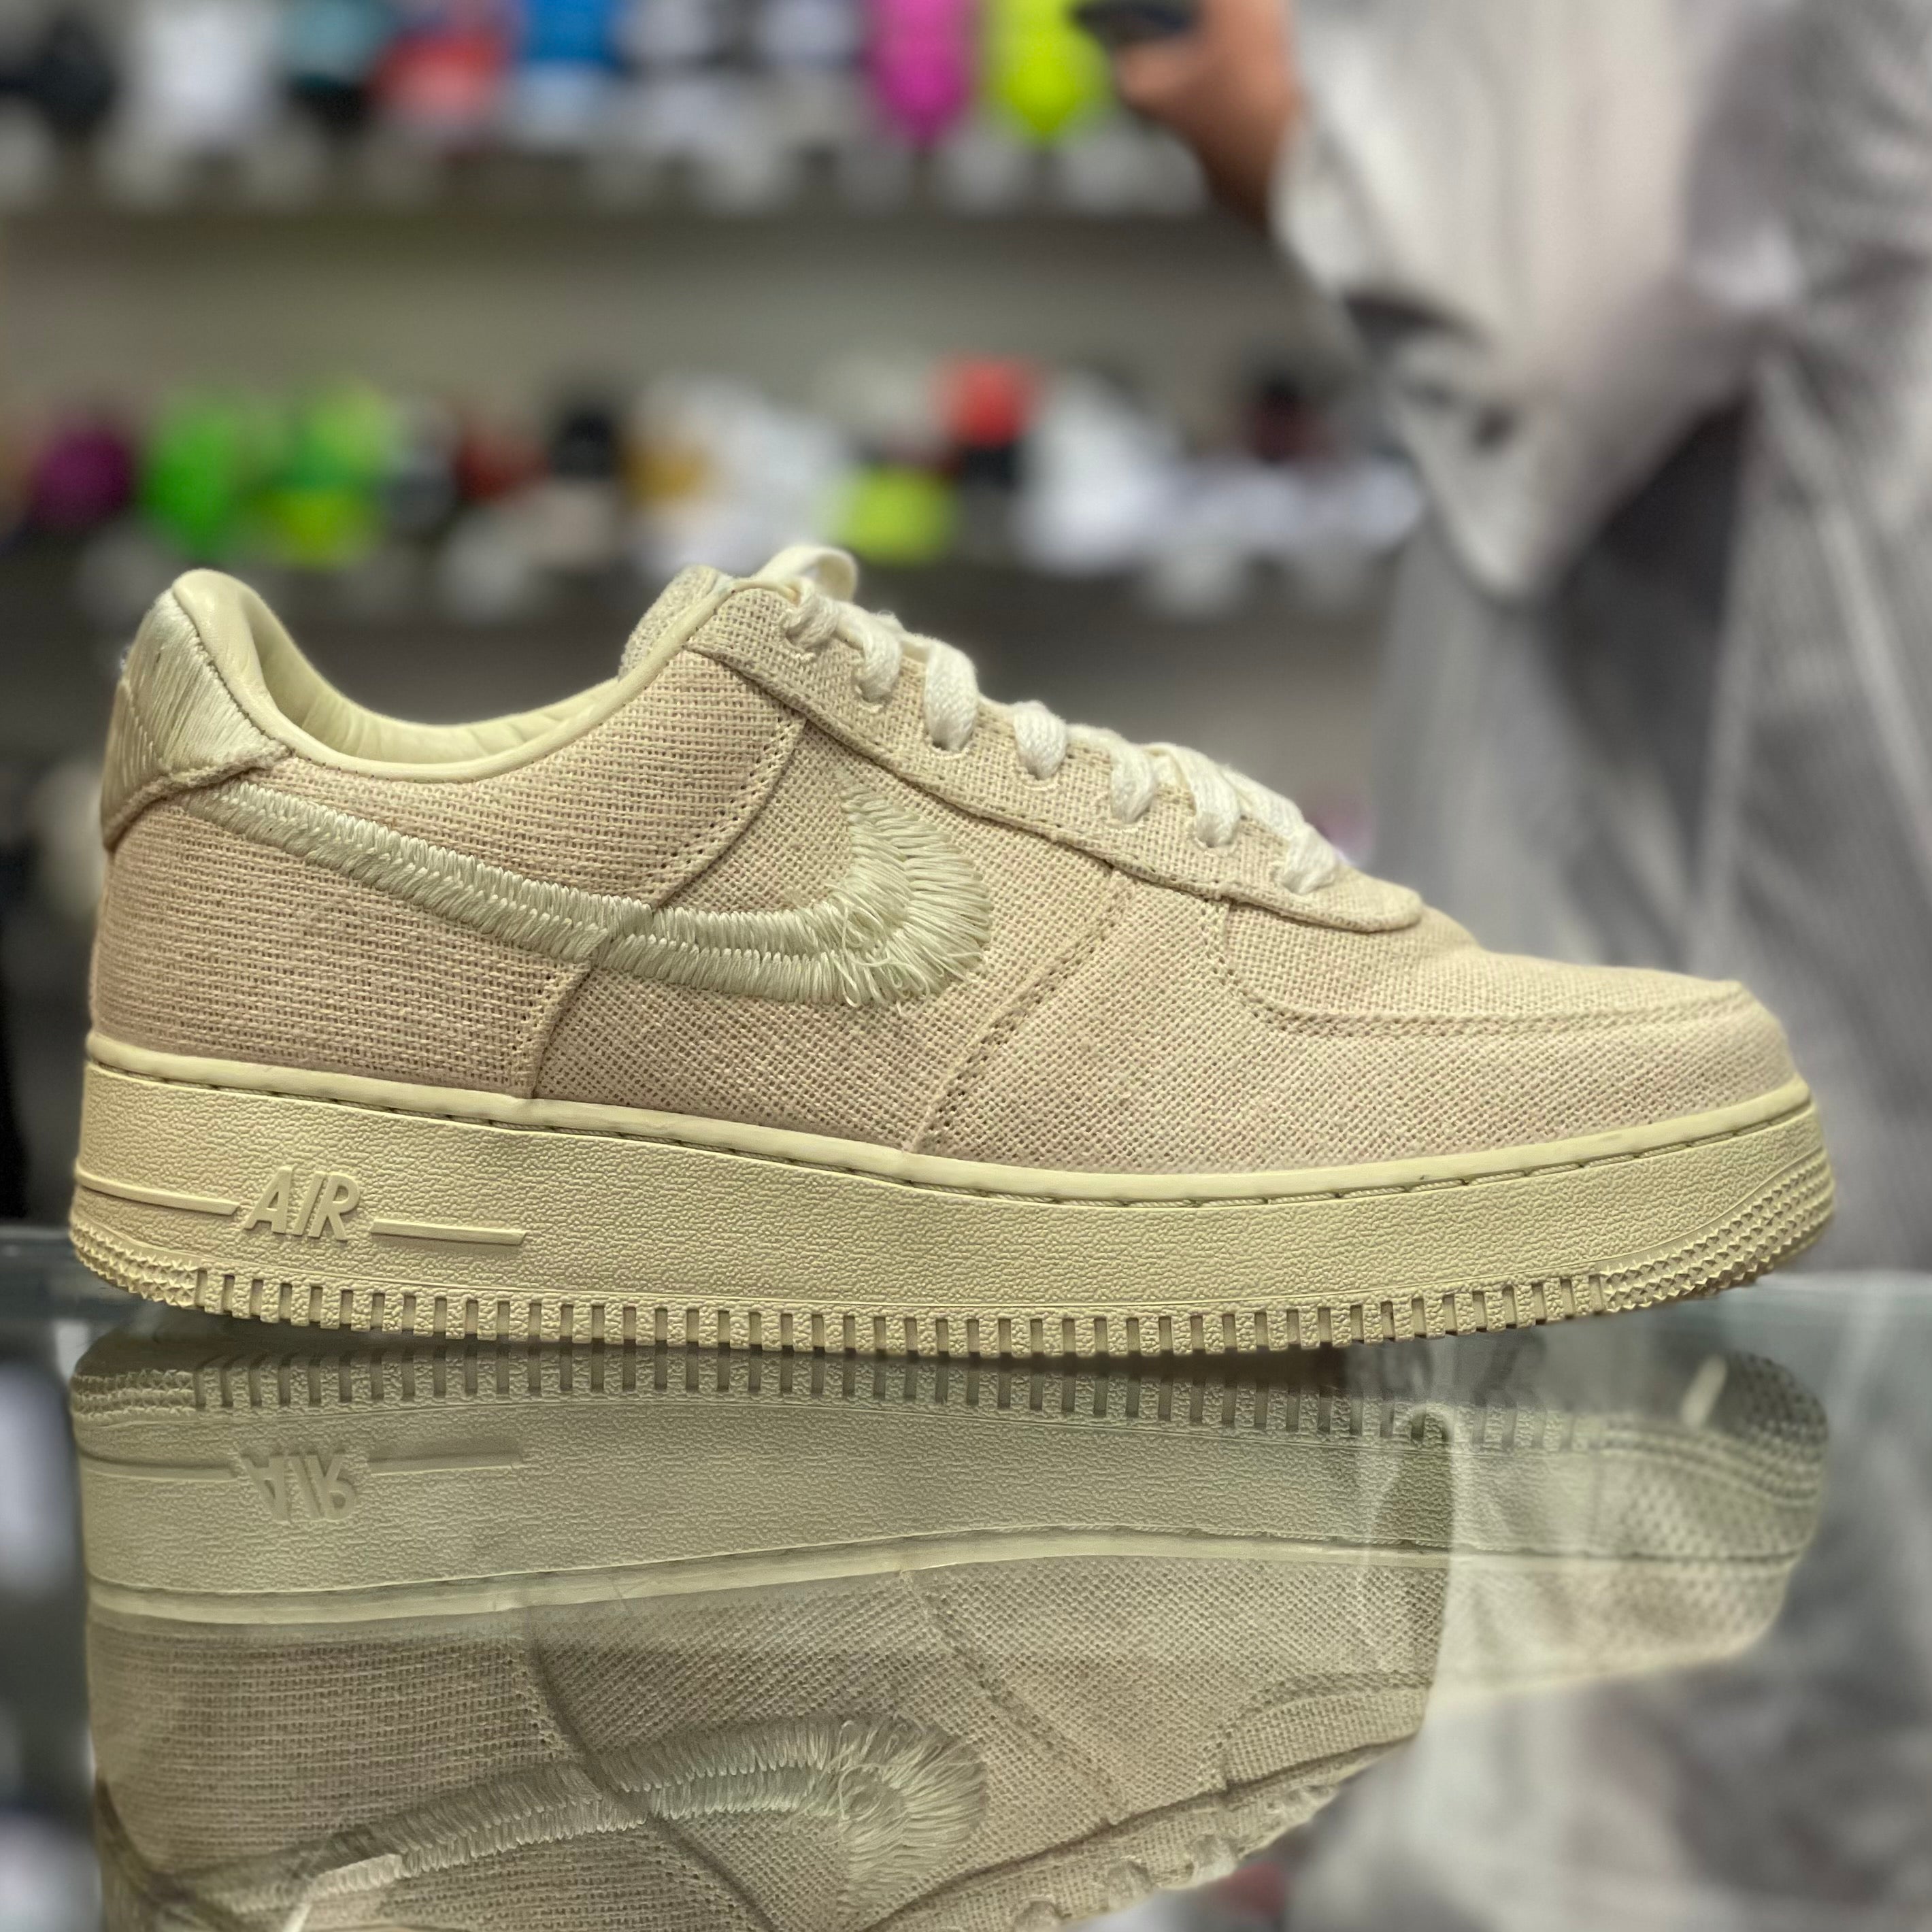 Nike Air Force 1 “Stussy Fossil”